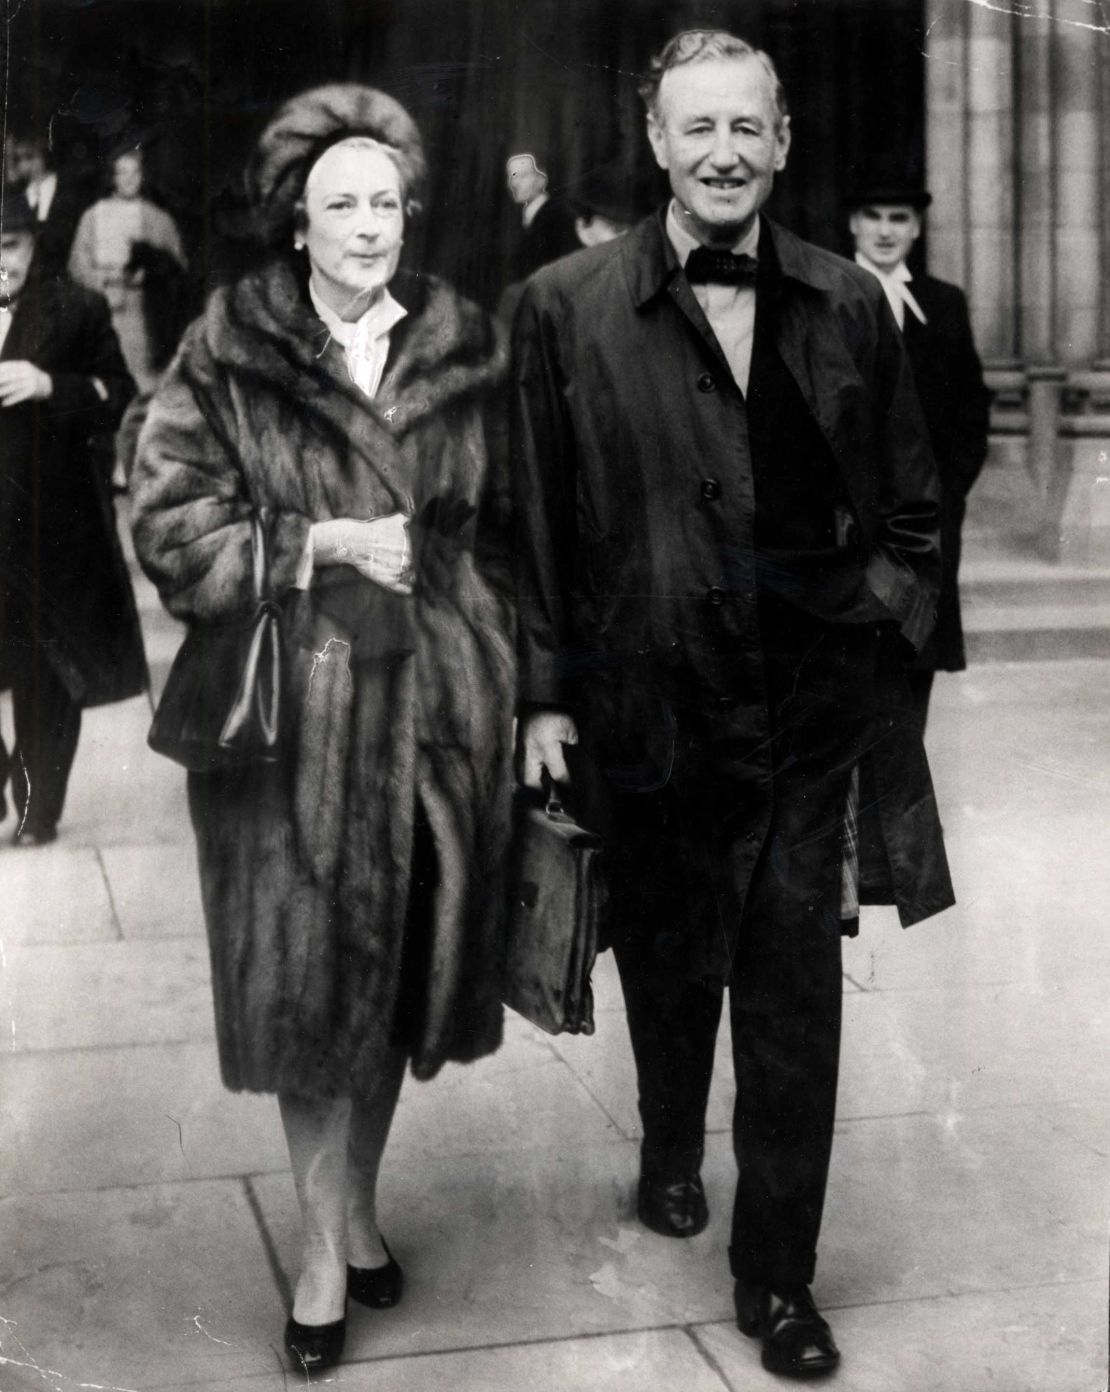 Ian and Ann Fleming together.